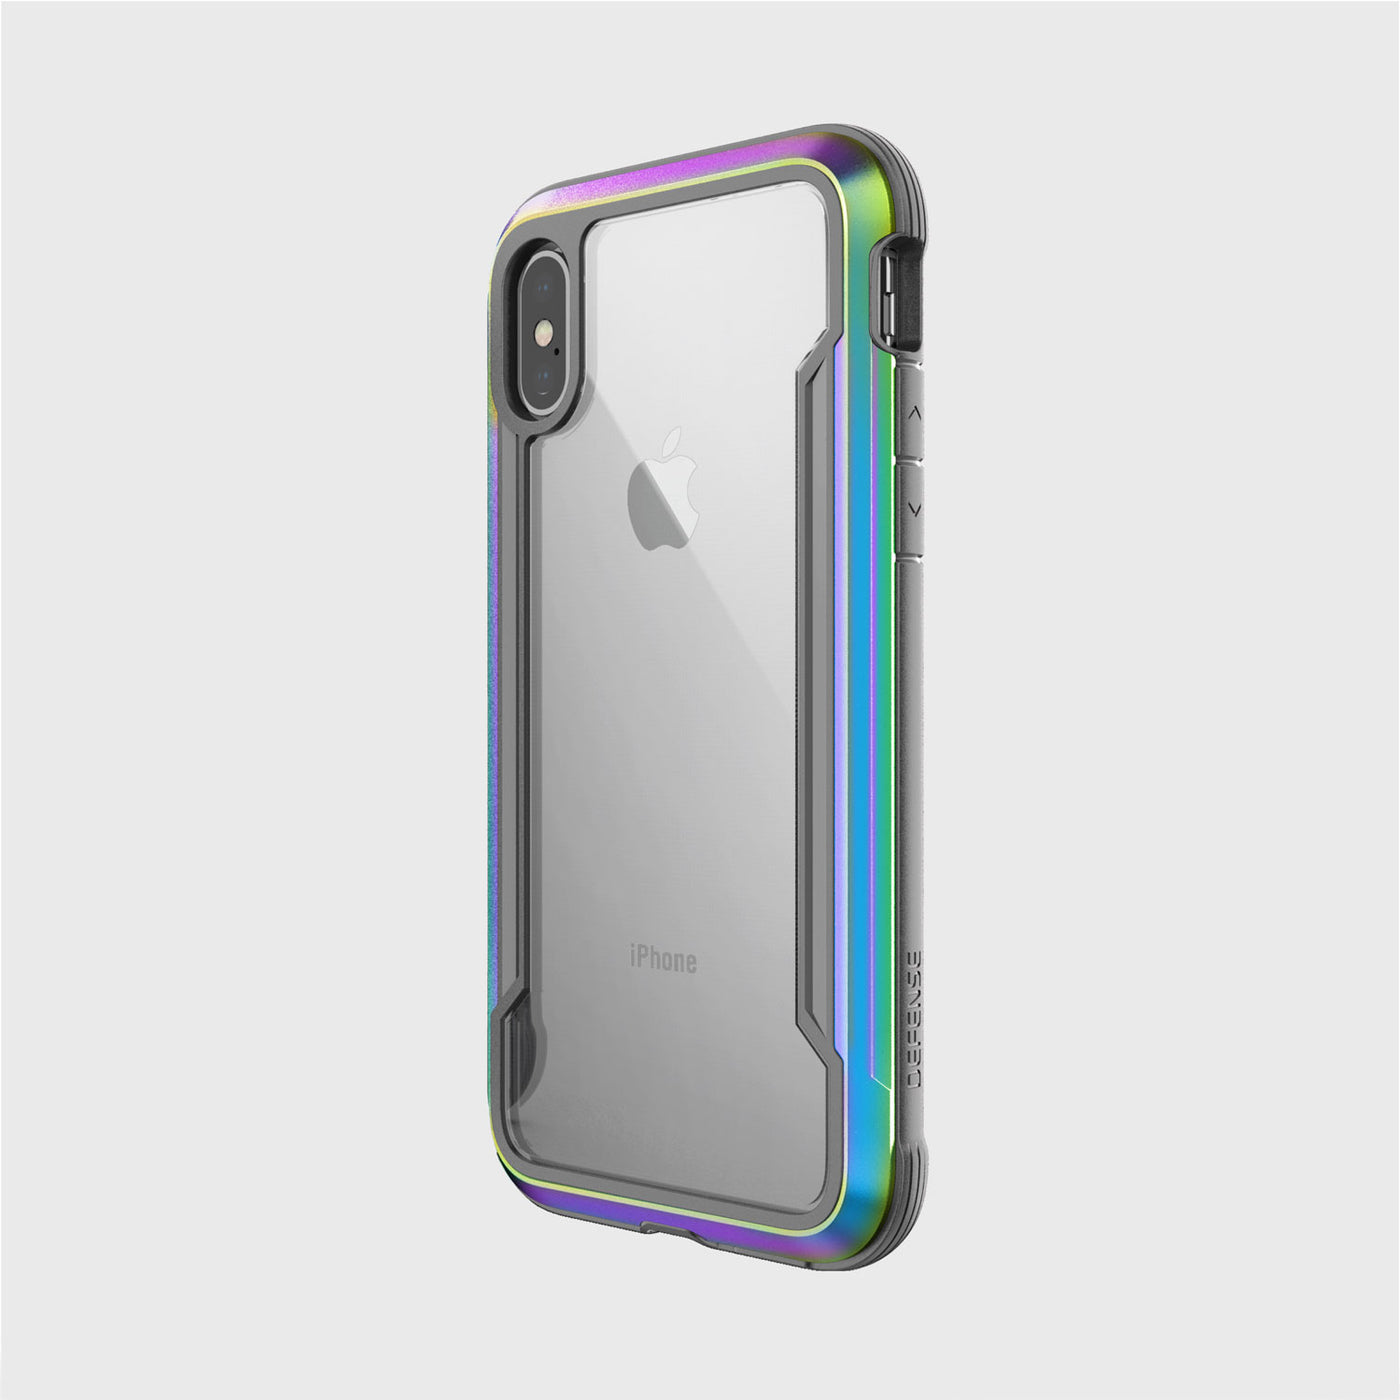 Rugged Case for iPhone X/XS. Raptic Shield in iridescent.